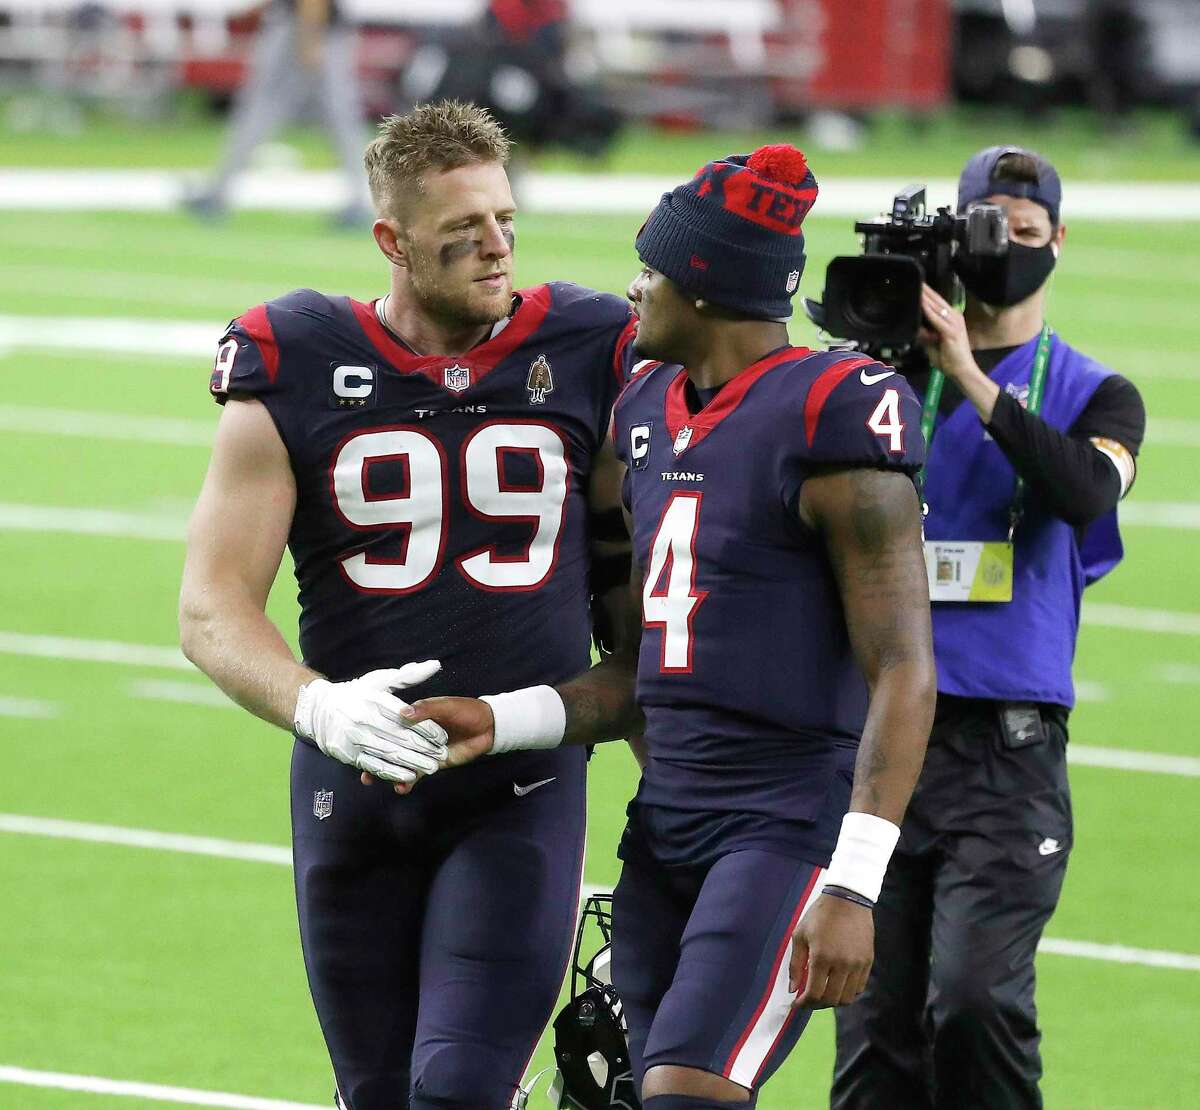 Houston Texans defensive end J.J. Watt (99) shakes hands with quarterback Deshaun Watson (4) walk back to the locker room after the Houston Texans 41-38 loss after the fourth quarter of an NFL football game Sunday, Jan. 3, 2021, at NRG Stadium in Houston .